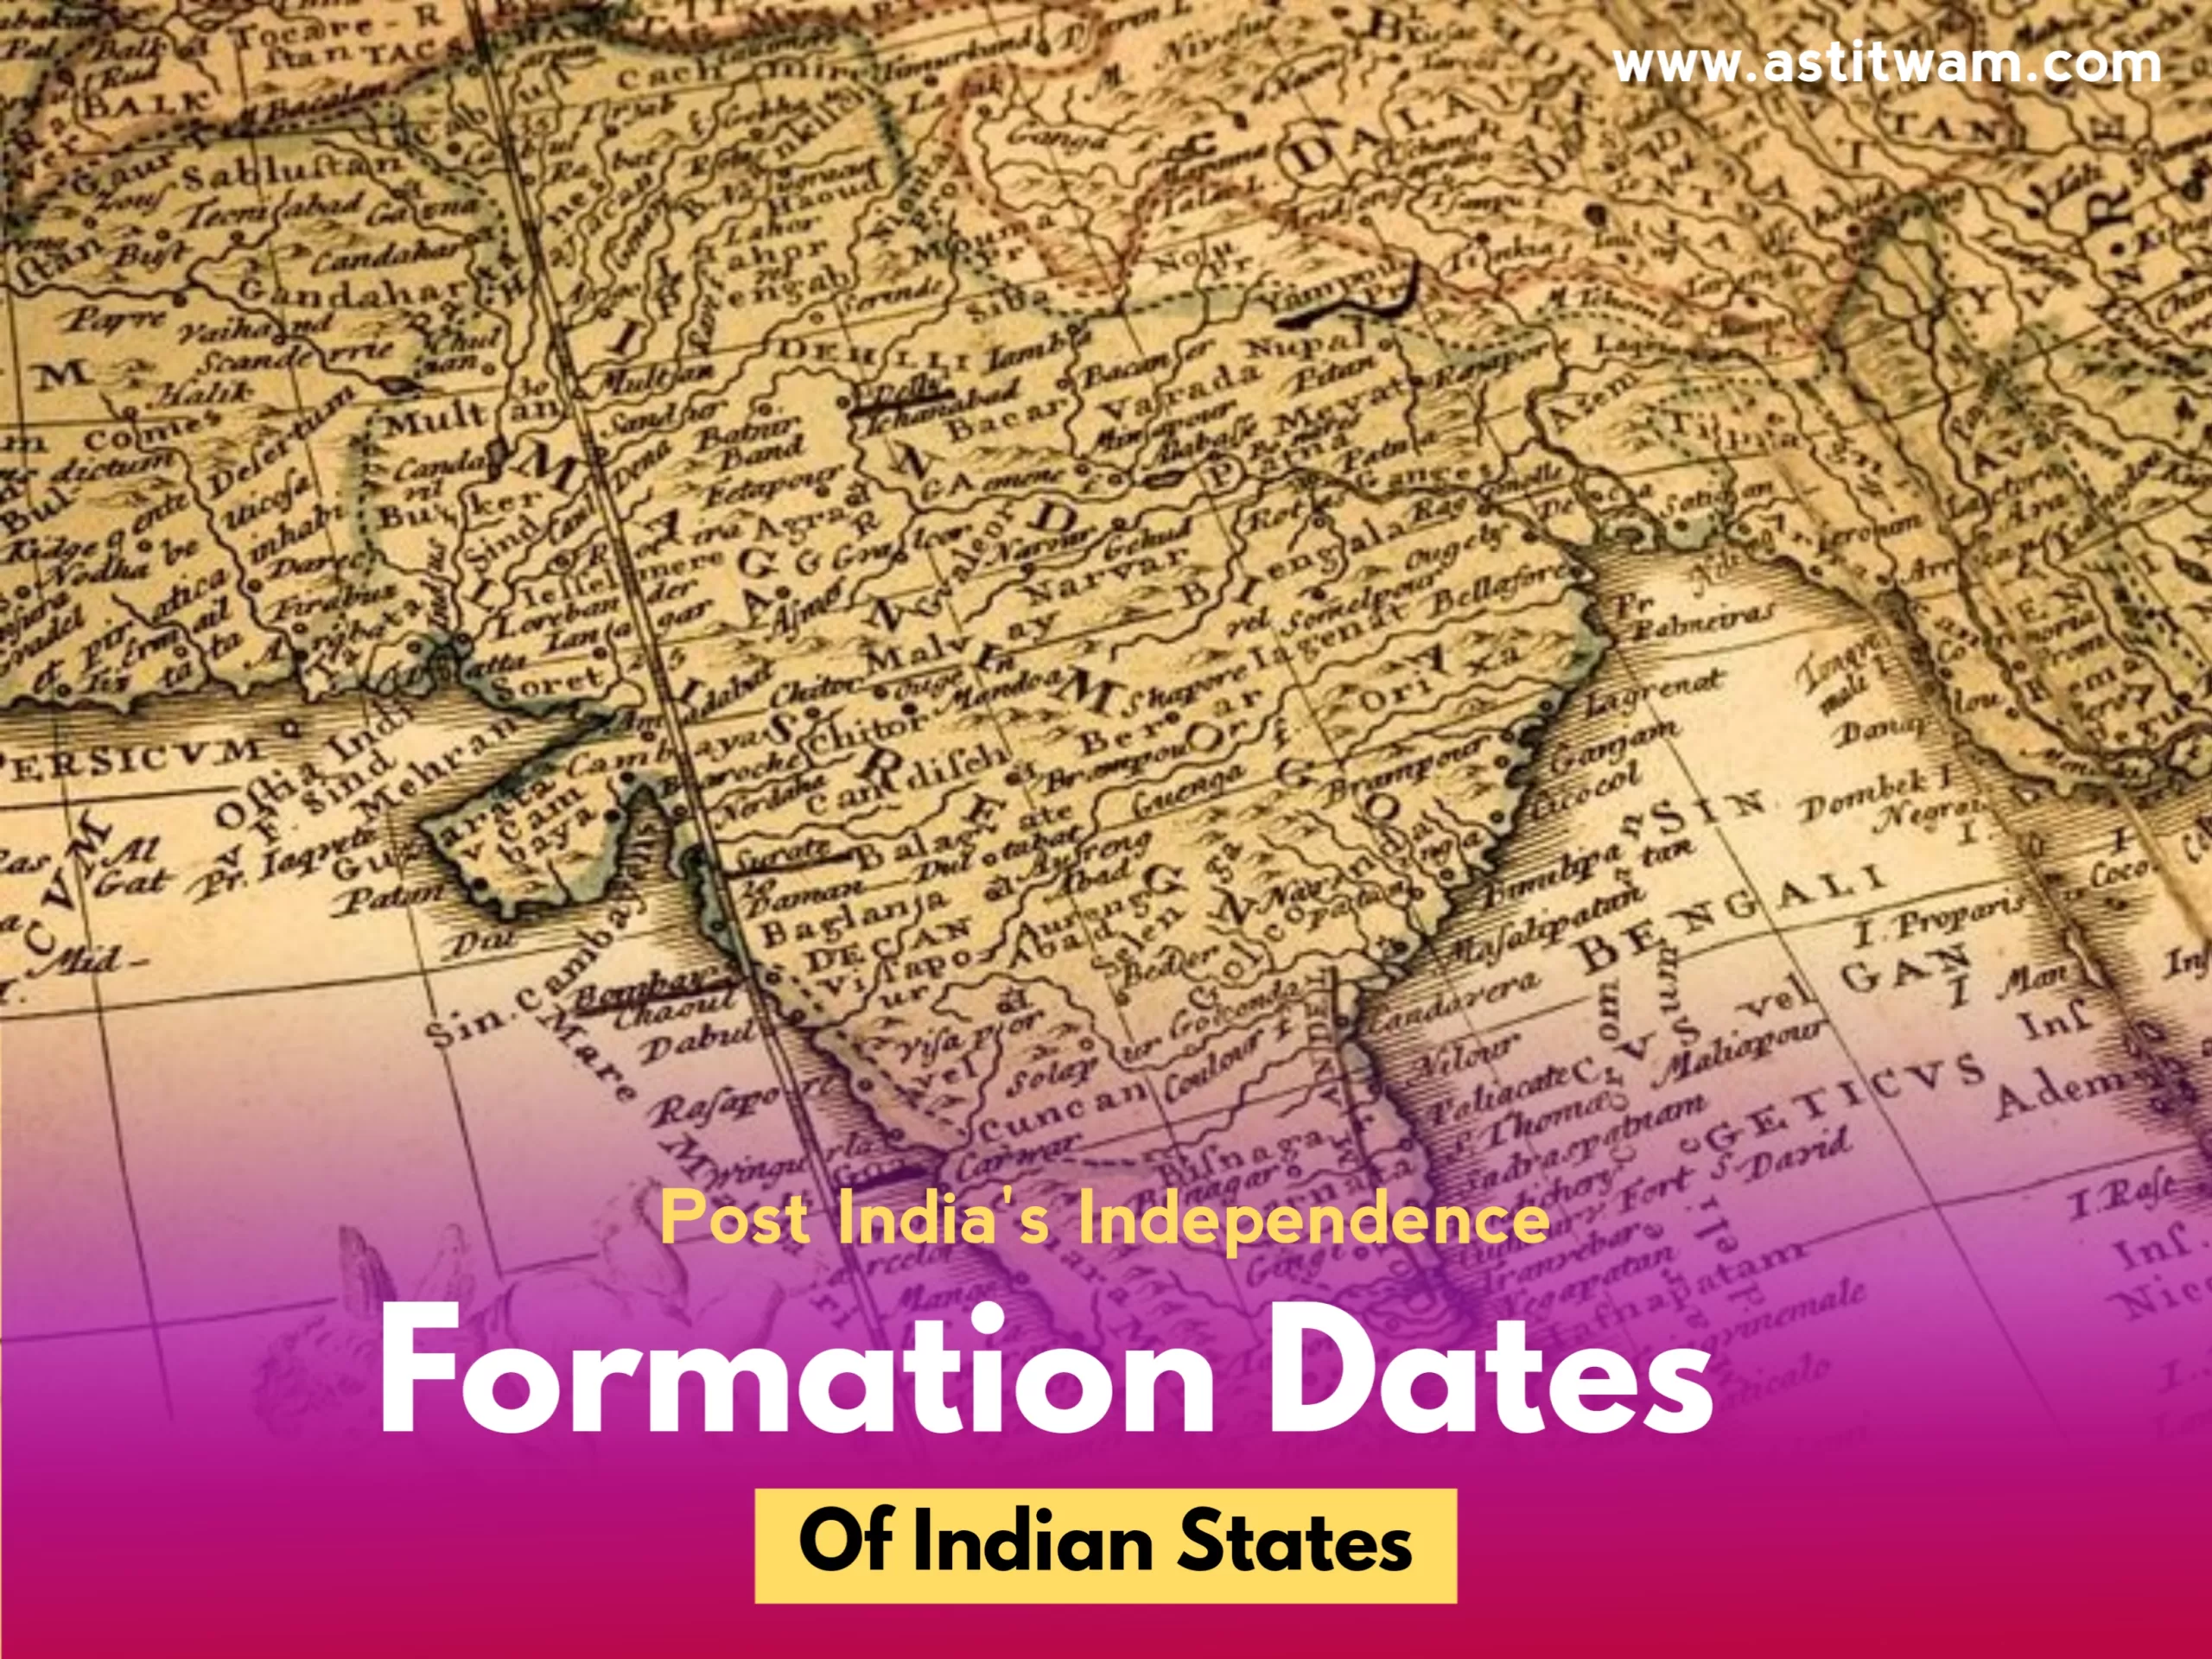 Formation Dates of Indian States